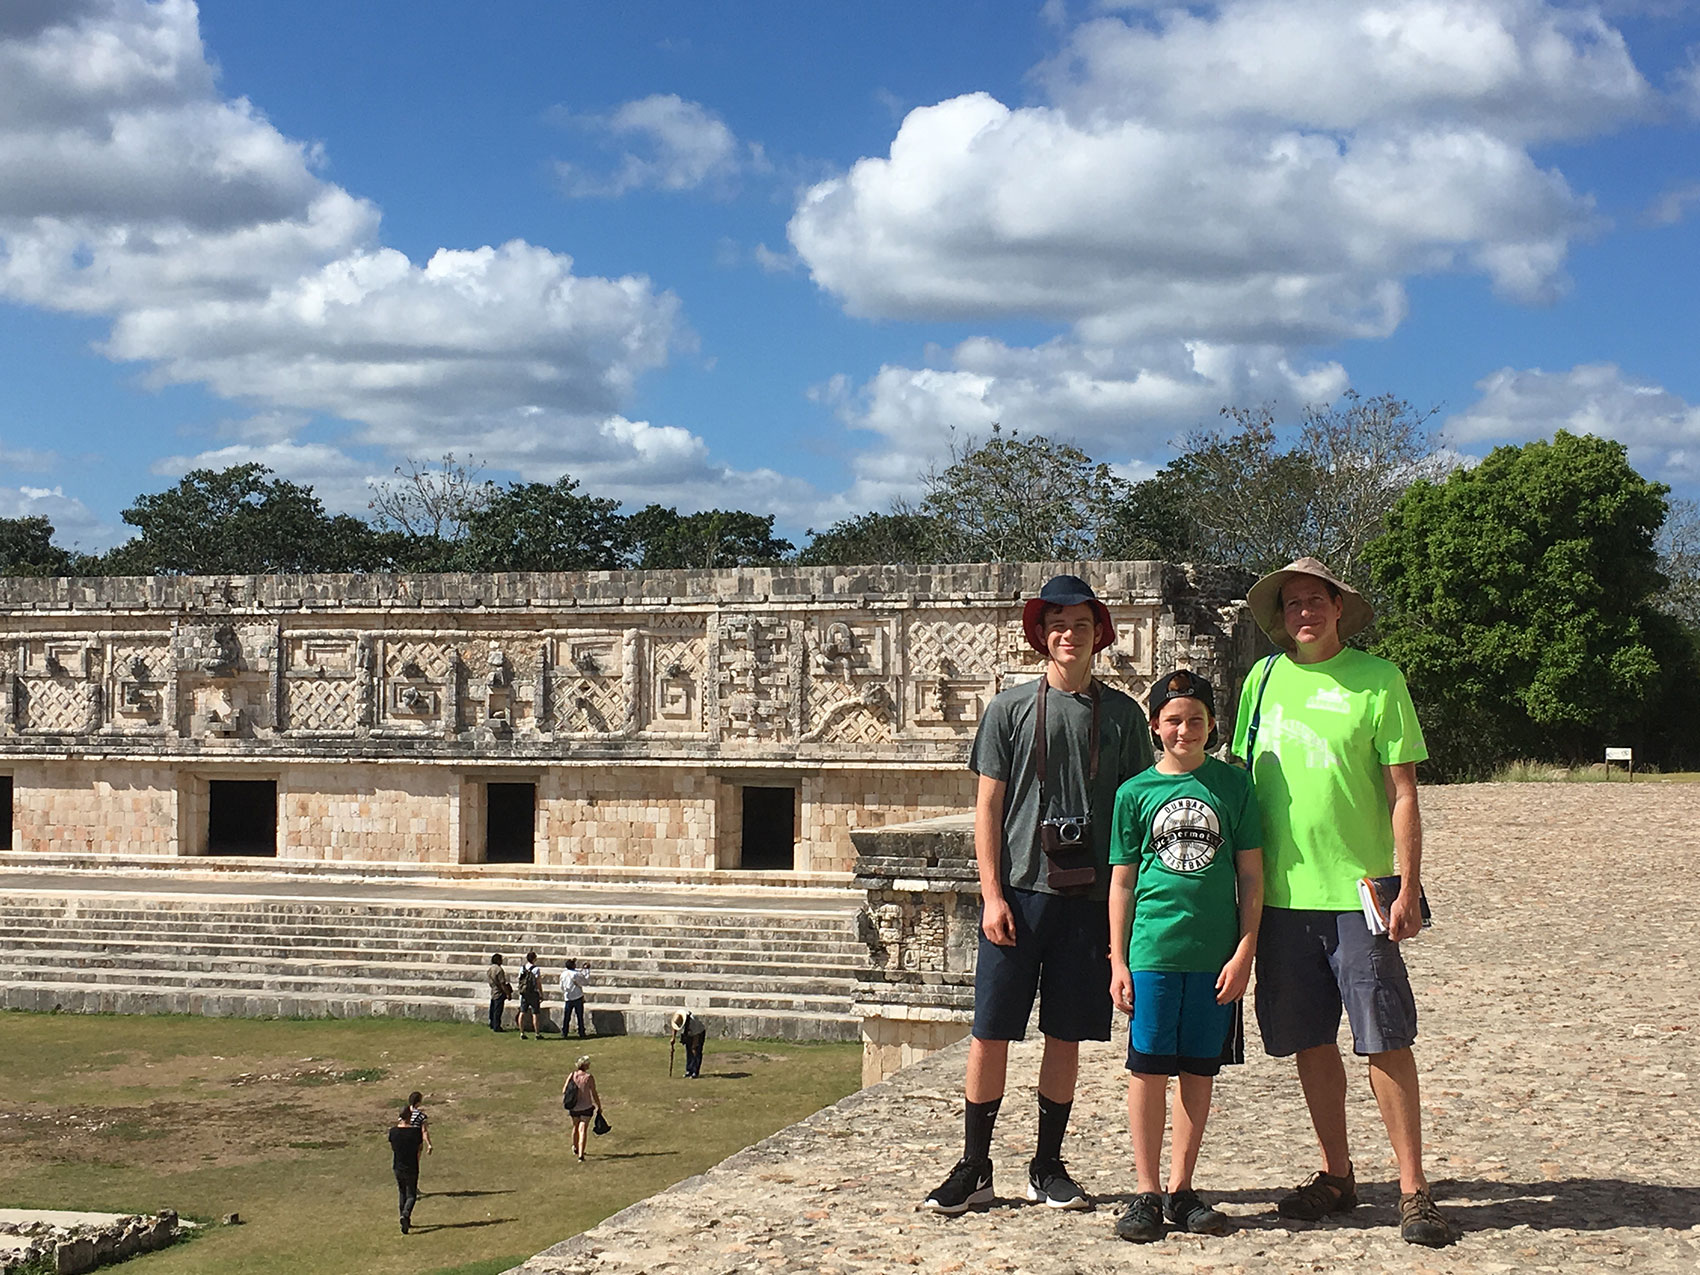 Family on vacation in Mexico